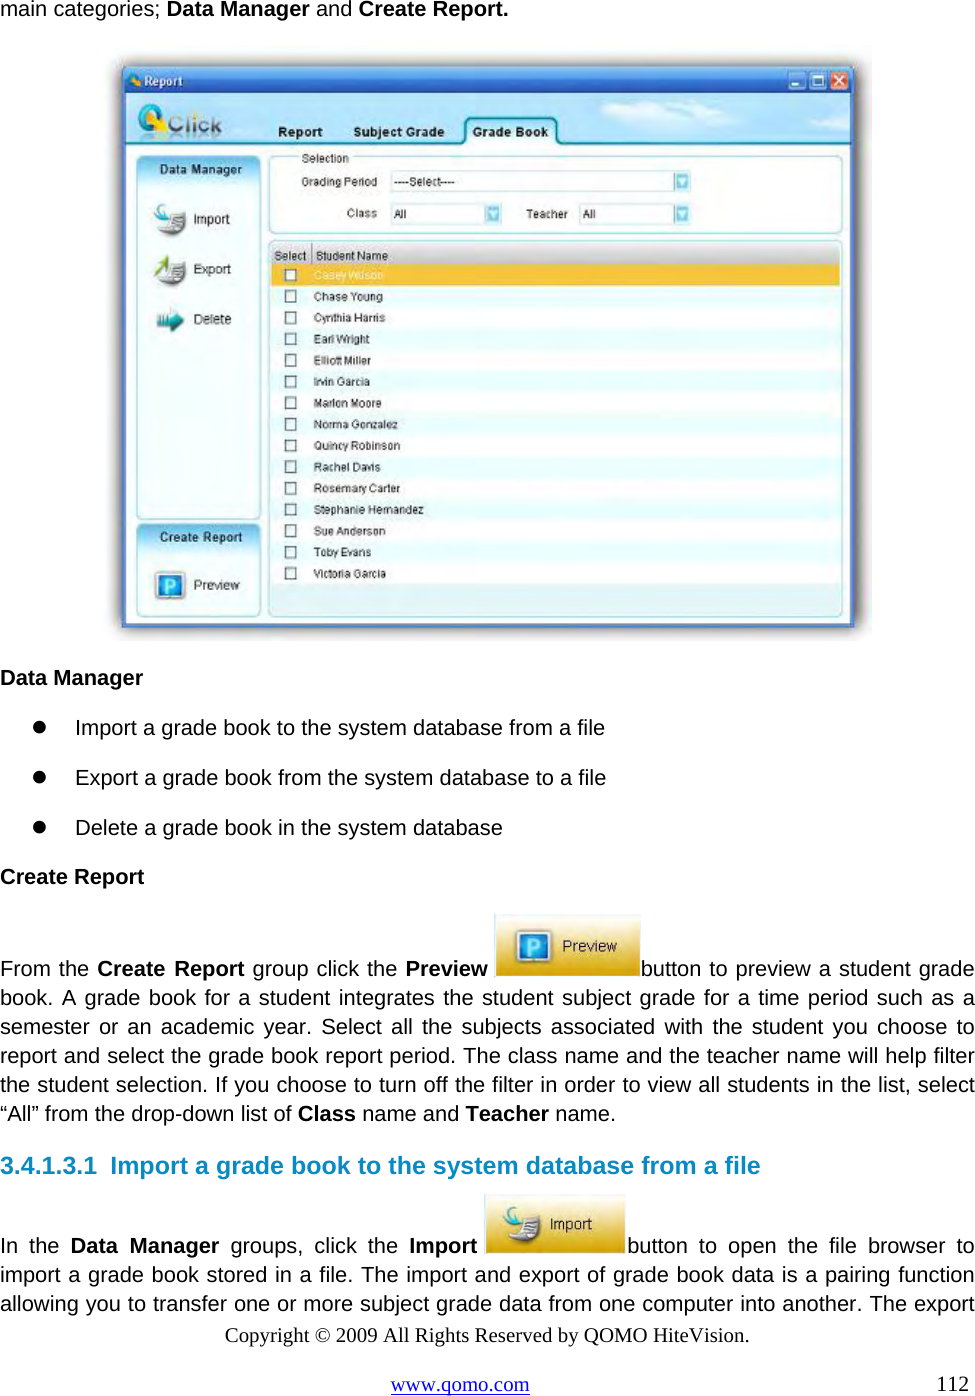 Copyright © 2009 All Rights Reserved by QOMO HiteVision. www.qomo.com                                                                          112  main categories; Data Manager and Create Report.  Data Manager   Import a grade book to the system database from a file    Export a grade book from the system database to a file   Delete a grade book in the system database Create Report From the Create Report group click the Preview  button to preview a student grade book. A grade book for a student integrates the student subject grade for a time period such as a semester or an academic year. Select all the subjects associated with the student you choose to report and select the grade book report period. The class name and the teacher name will help filter the student selection. If you choose to turn off the filter in order to view all students in the list, select “All” from the drop-down list of Class name and Teacher name. 3.4.1.3.1  Import a grade book to the system database from a file In the Data Manager groups, click the Import  button to open the file browser to import a grade book stored in a file. The import and export of grade book data is a pairing function allowing you to transfer one or more subject grade data from one computer into another. The export 